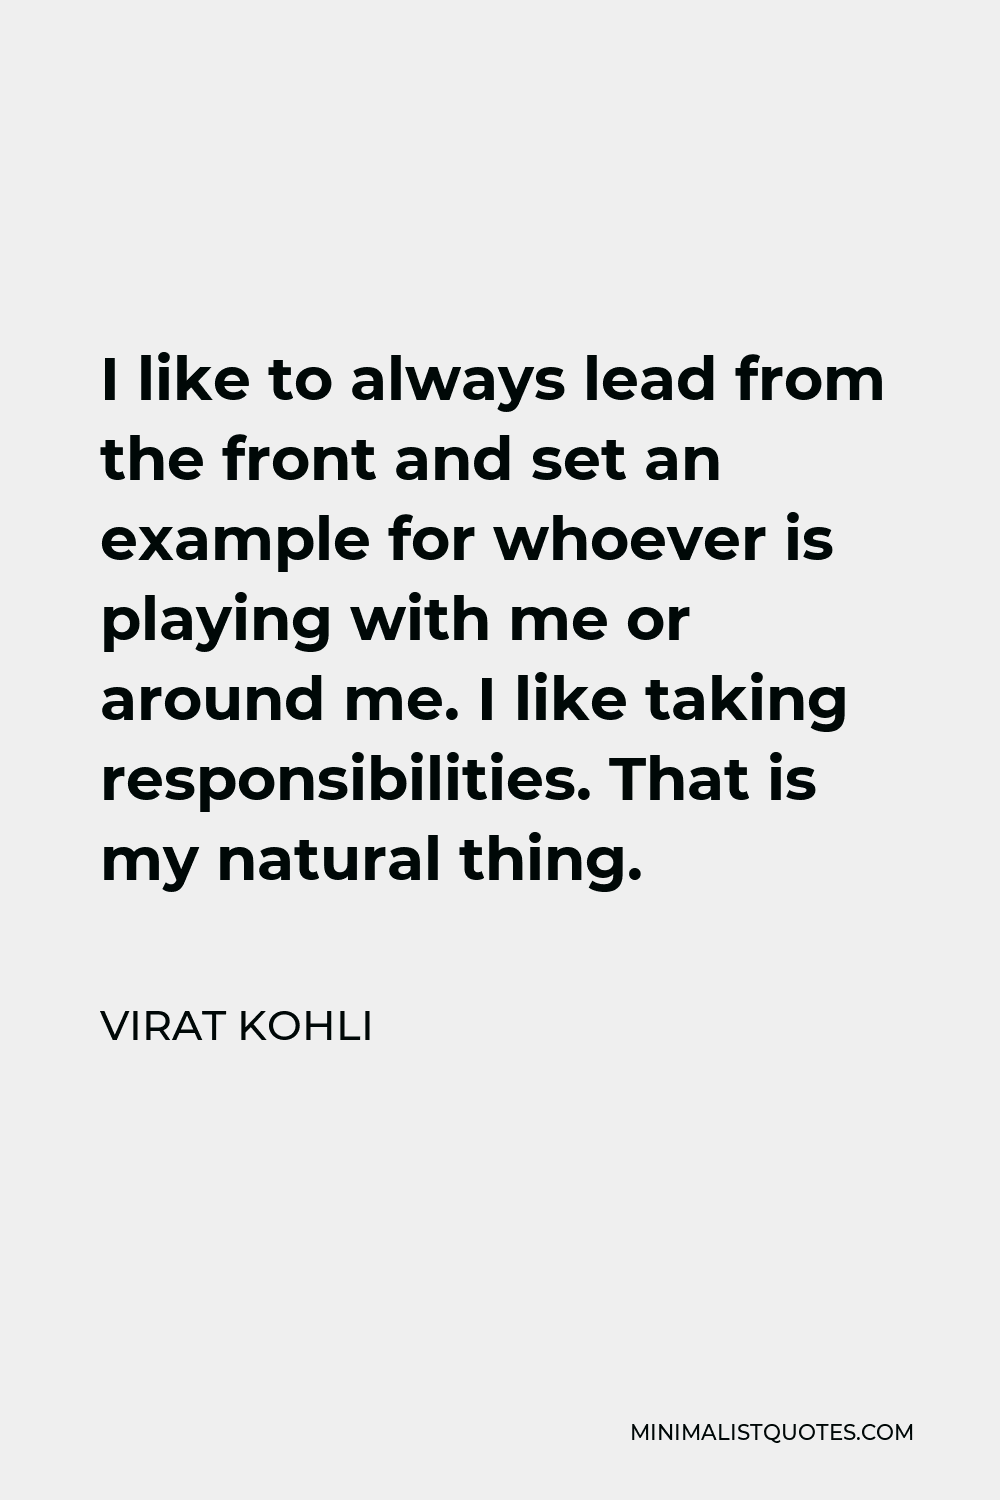 Virat Kohli Quote - I like to always lead from the front and set an example for whoever is playing with me or around me. I like taking responsibilities. That is my natural thing.